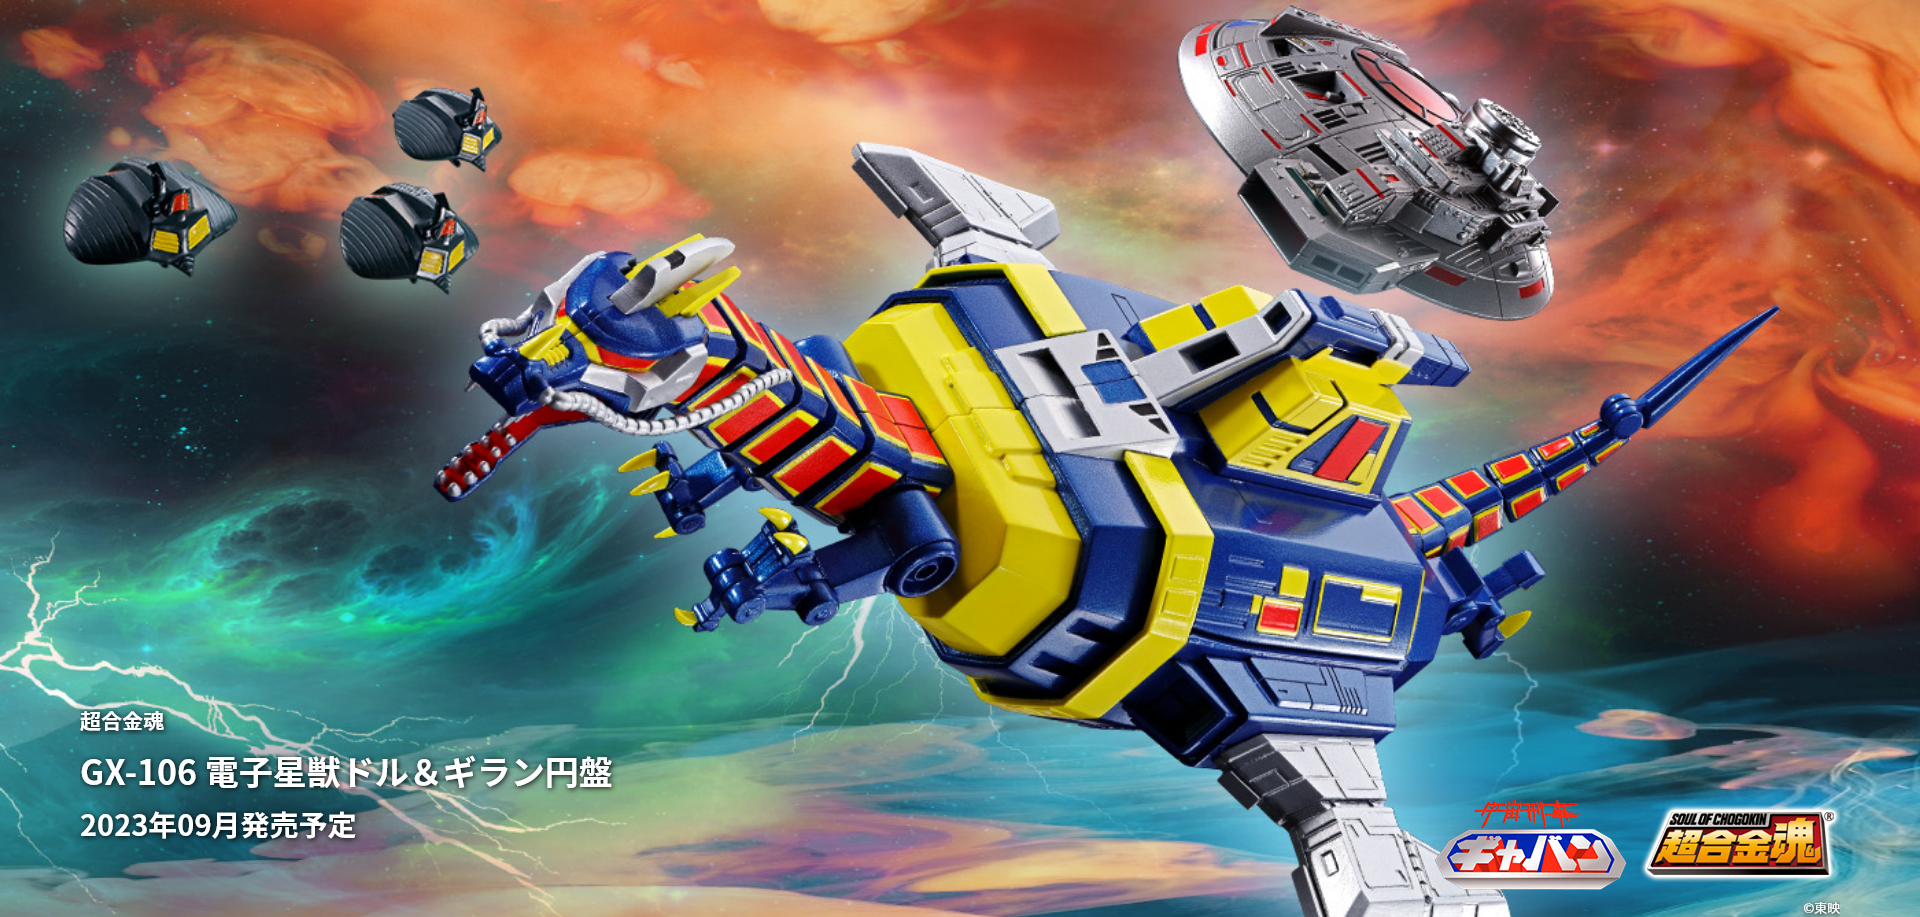 Gavan&#39;s Deposition comes to CHOGOKIN! Today we&#39;re introducing CHOGOKIN SPACE SHERIFF GAVAN &amp; SYBARIAN with prototype photos! Releases on April 22!